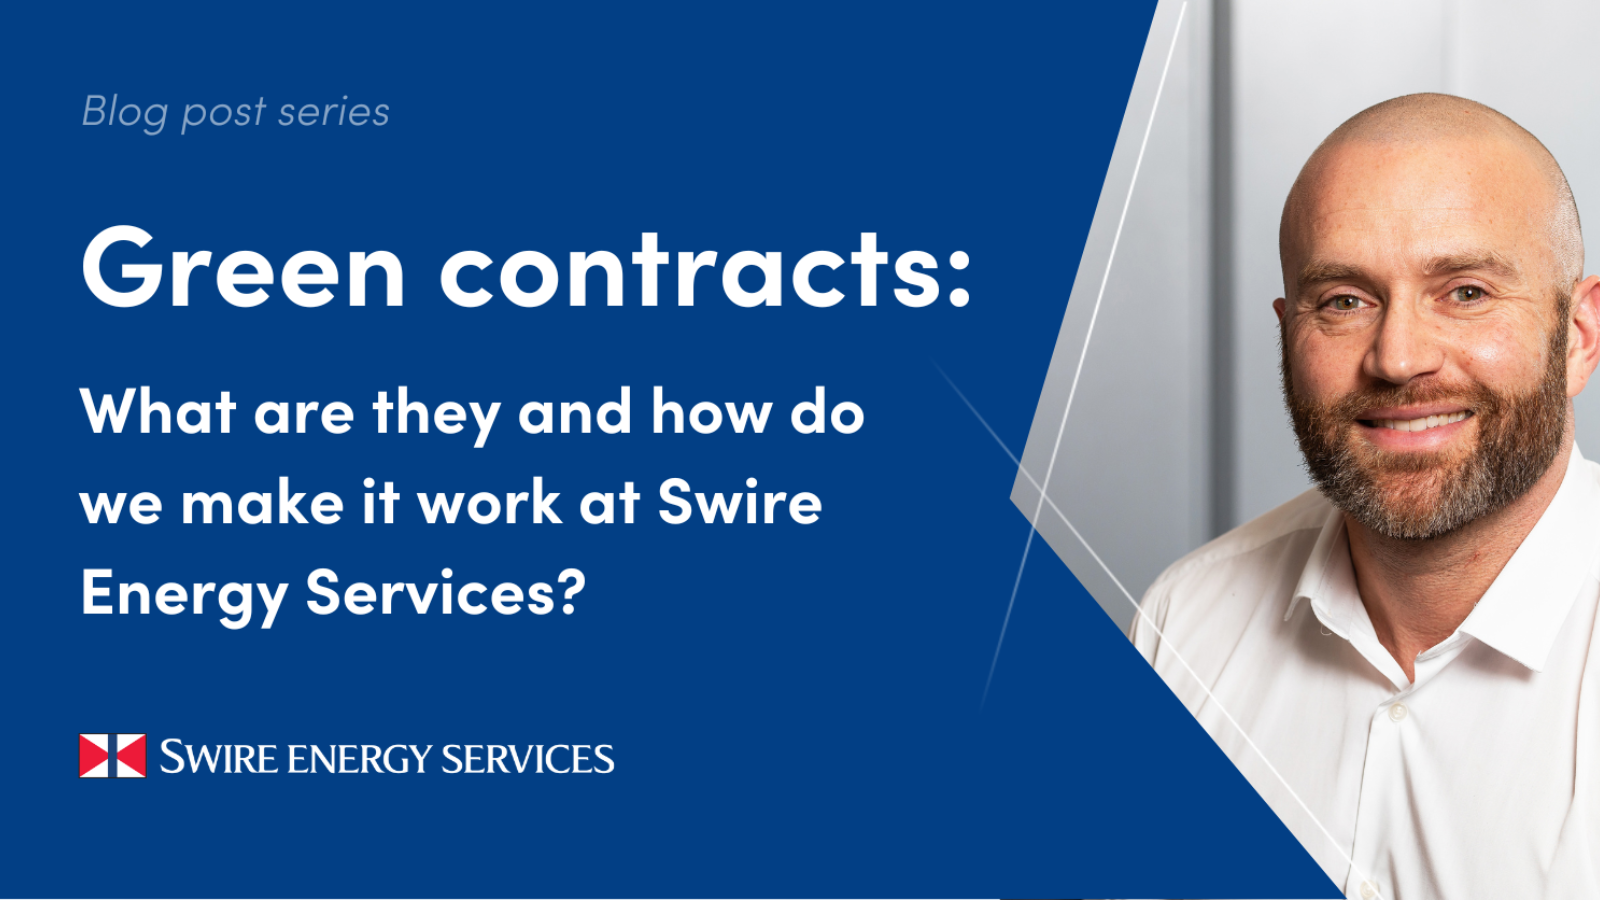 Green contracts: What are they and how do we make it work at Swire Energy Services?